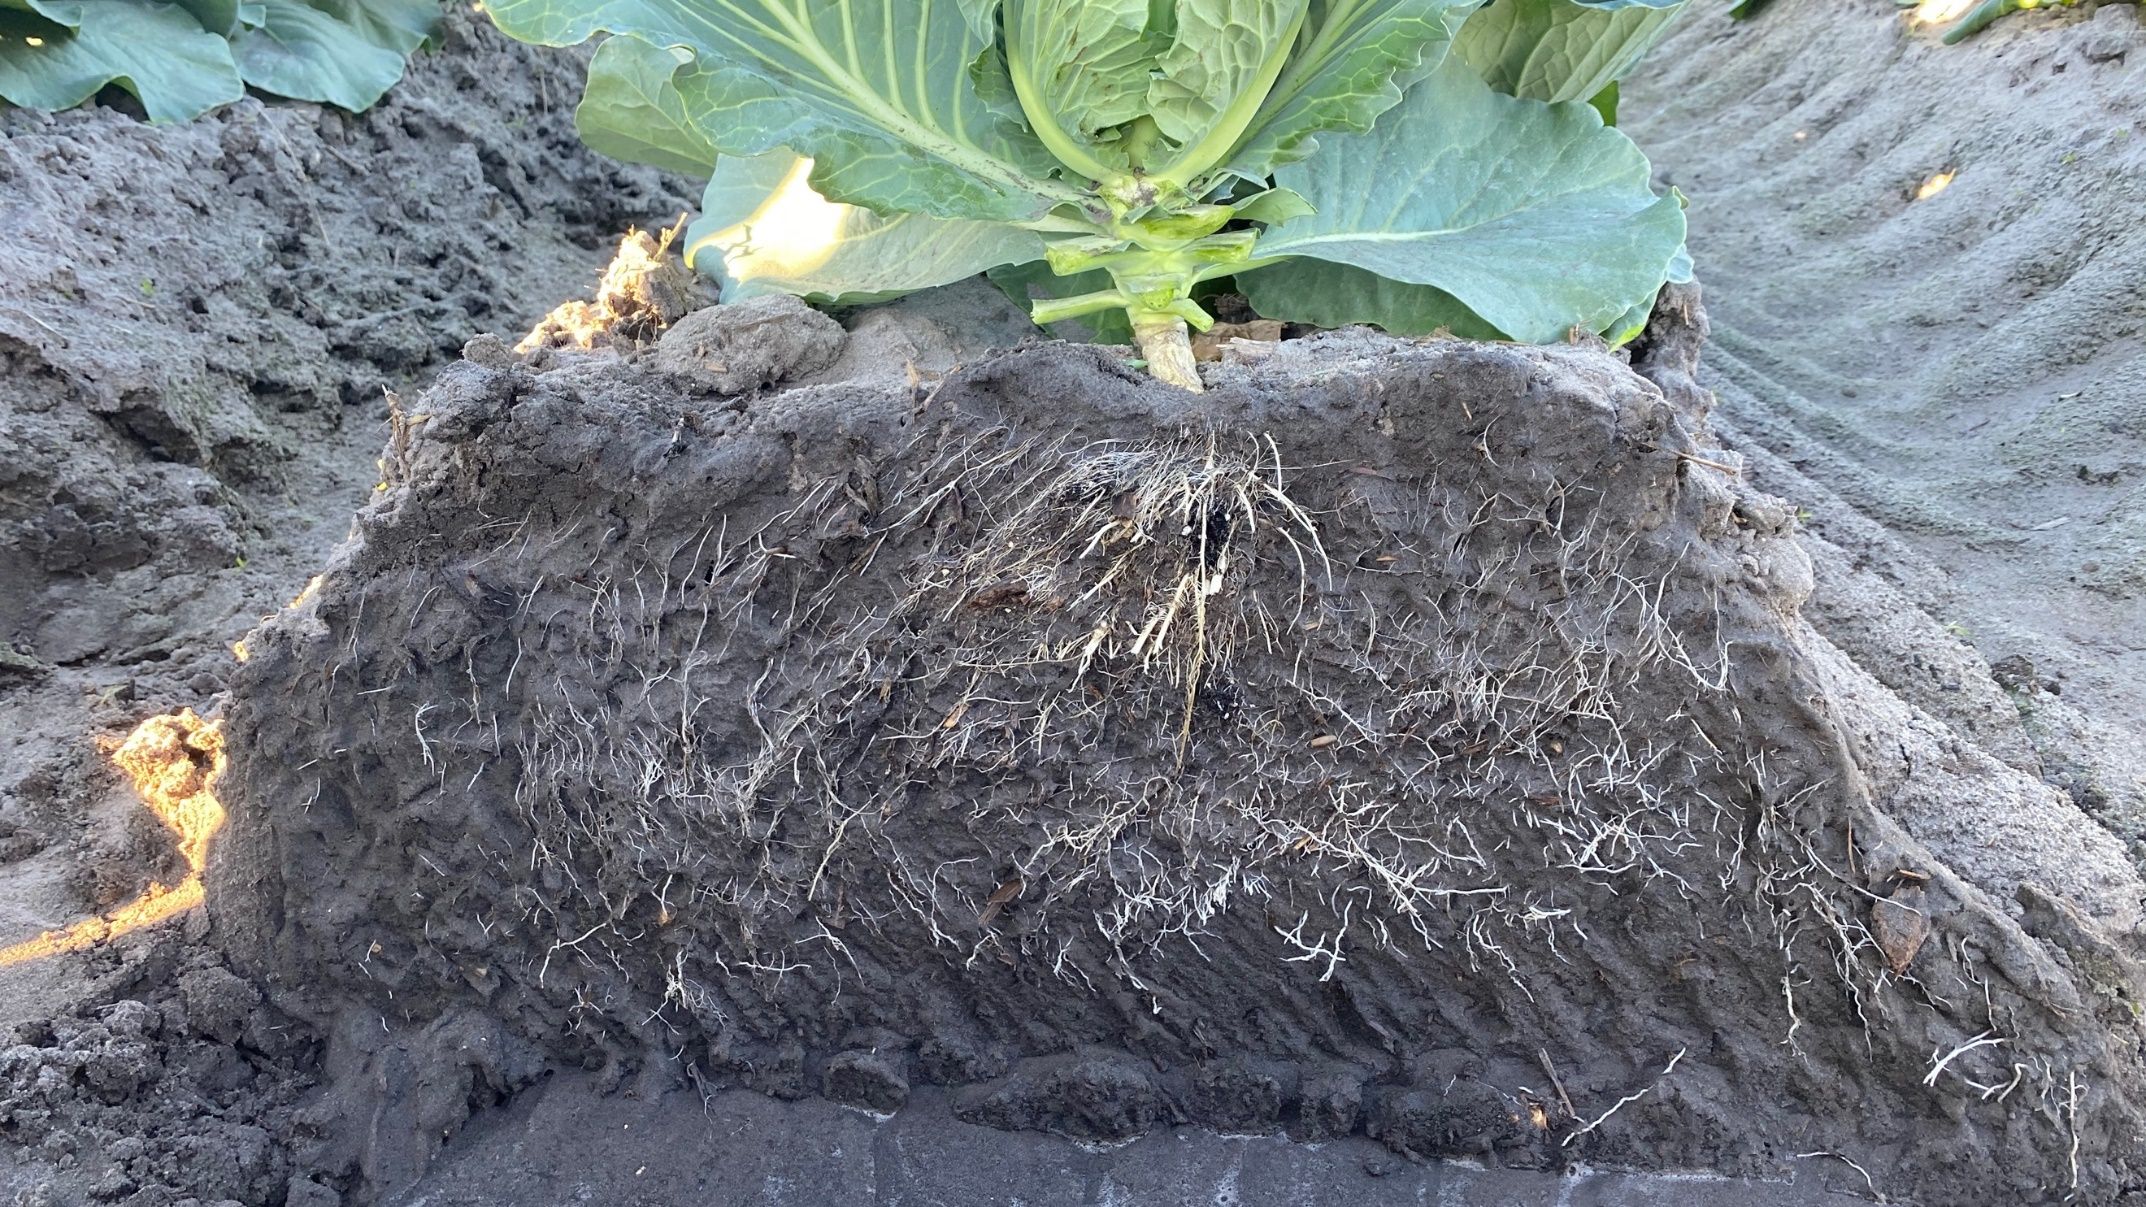 Root distribution of cabbage cultivated on bare ground (40-inch row spacing with in-row plant spacing of 8 inches, 19,600 plants/acre). Placement of fertilizer should target areas with high concentration of roots, avoiding broadcast application of fertilizer. 